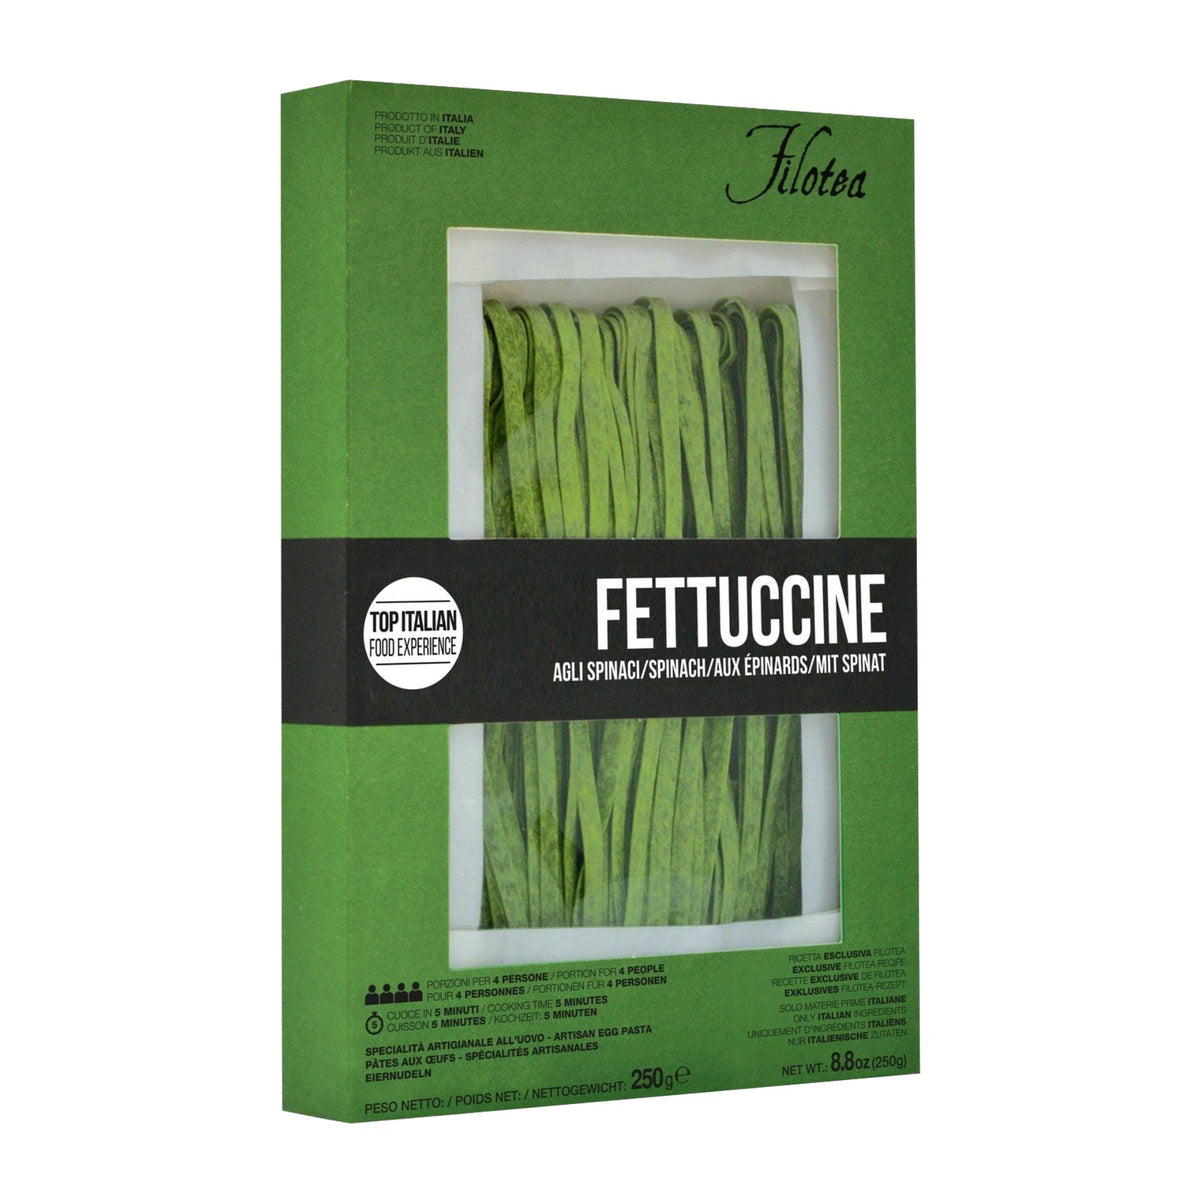 Filotea Spinach Fettuccine 250g  | Imported and distributed in the UK by Just Gourmet Foods